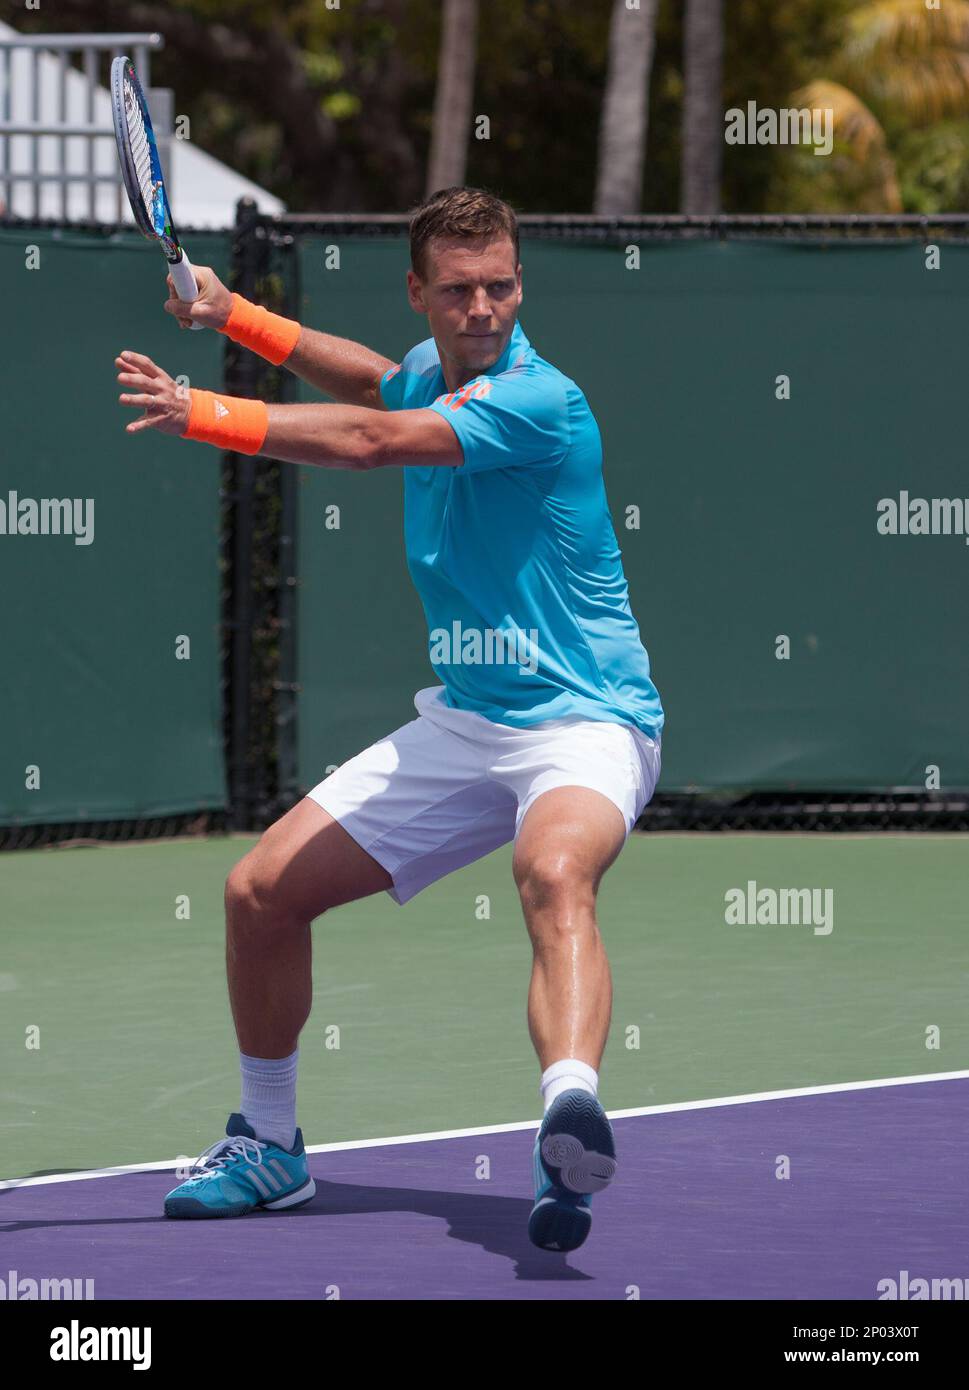 KEY BISCAYNE, FL - MARCH 25: Tomas Berdych (CZE) in action during the 2017  Miami Open in Key on March 25, 2017, at the Tennis Center at Crandon Park  in Biscayne, FL. (